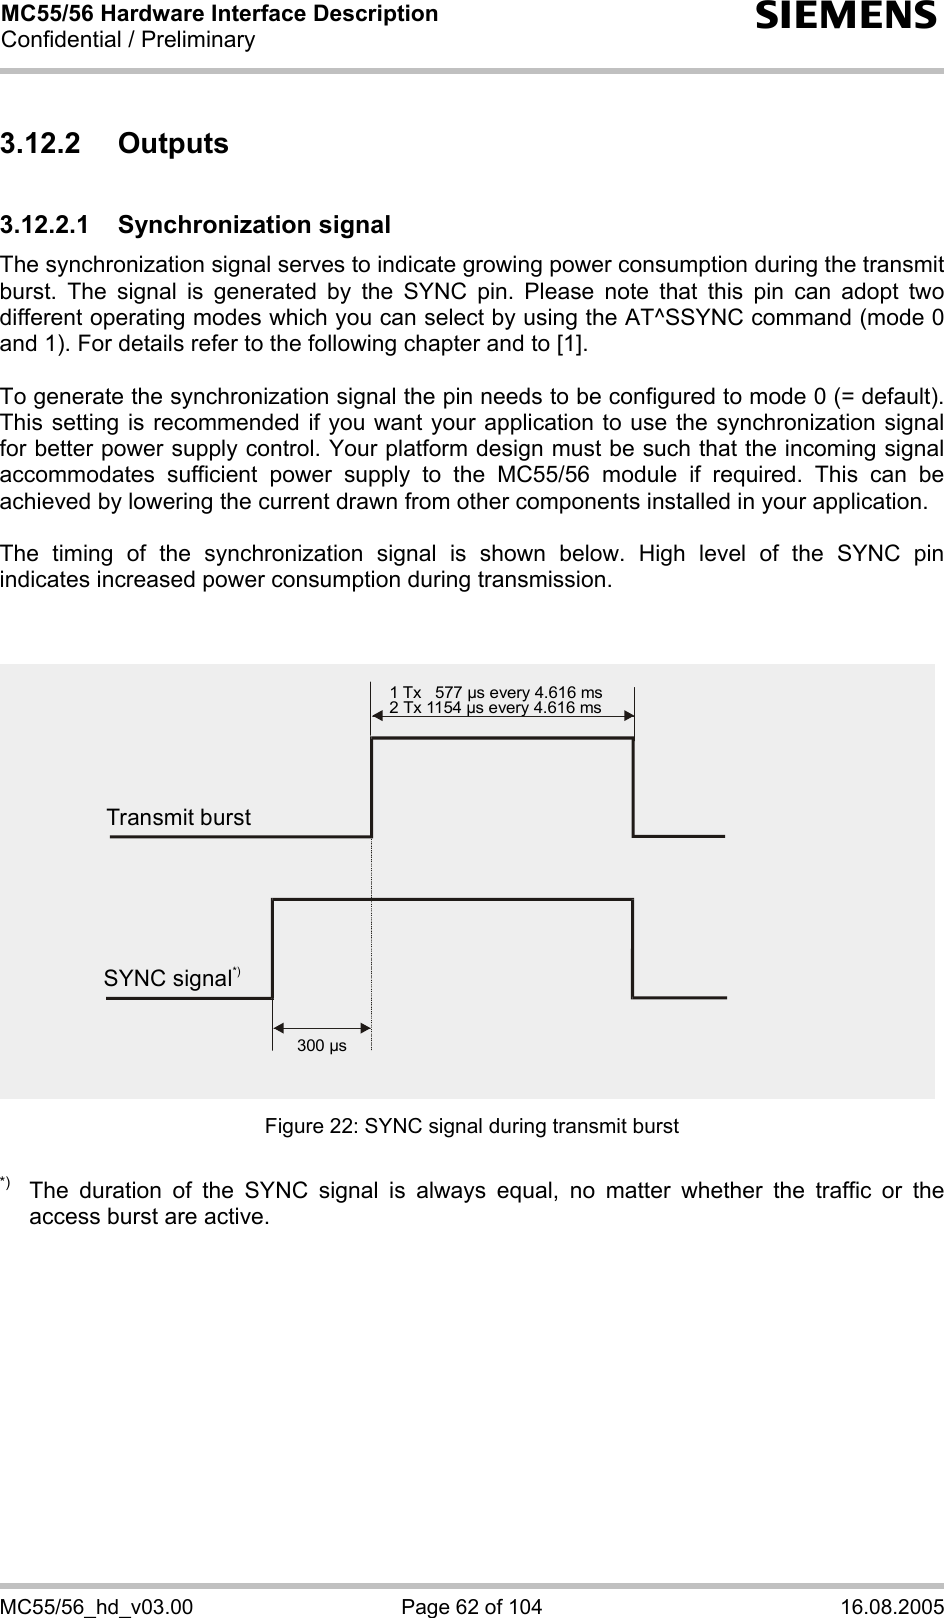 MC55/56 Hardware Interface Description Confidential / Preliminary s MC55/56_hd_v03.00  Page 62 of 104  16.08.2005 3.12.2 Outputs 3.12.2.1 Synchronization signal The synchronization signal serves to indicate growing power consumption during the transmit burst. The signal is generated by the SYNC pin. Please note that this pin can adopt two different operating modes which you can select by using the AT^SSYNC command (mode 0 and 1). For details refer to the following chapter and to [1].  To generate the synchronization signal the pin needs to be configured to mode 0 (= default). This setting is recommended if you want your application to use the synchronization signal for better power supply control. Your platform design must be such that the incoming signal accommodates sufficient power supply to the MC55/56 module if required. This can be achieved by lowering the current drawn from other components installed in your application.   The timing of the synchronization signal is shown below. High level of the SYNC pin indicates increased power consumption during transmission.   Figure 22: SYNC signal during transmit burst  *)  The duration of the SYNC signal is always equal, no matter whether the traffic or the access burst are active.  Transmit burst1 Tx   577 µs every 4.616 ms2 Tx 1154 µs every 4.616 ms300 µsSYNC signal*)